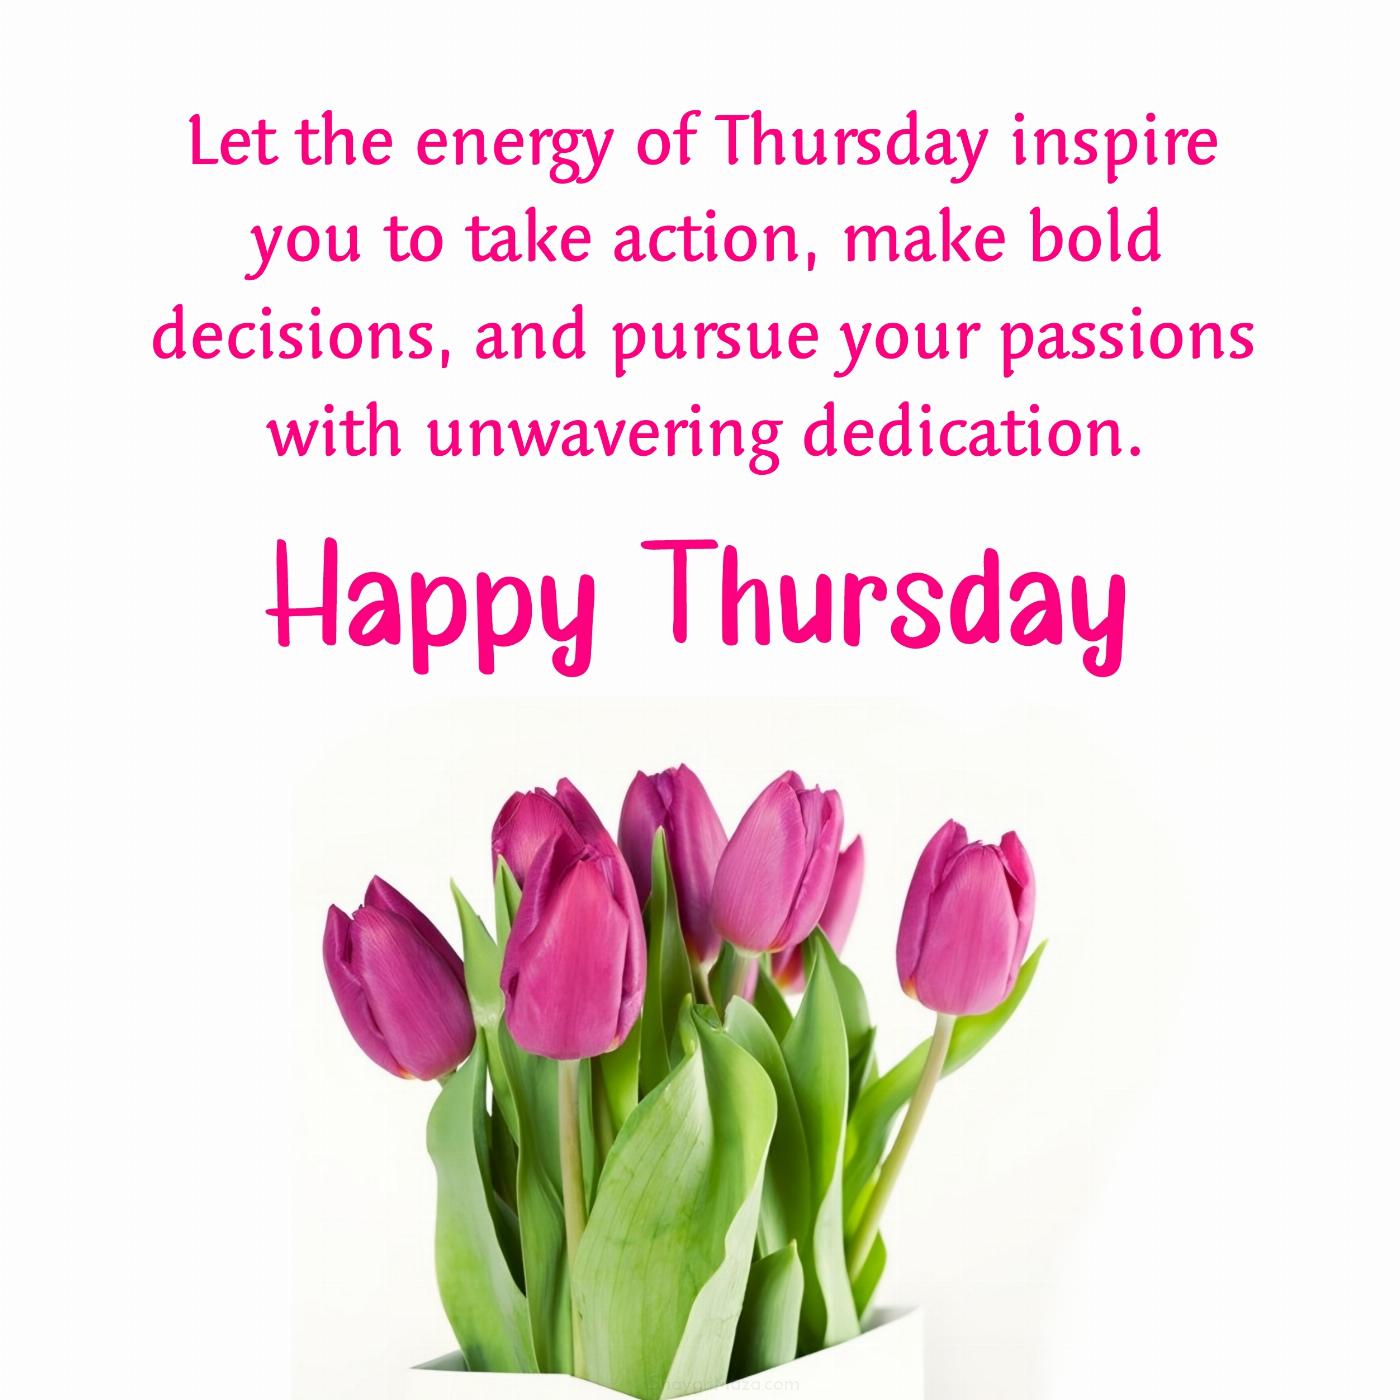 Let the energy of Thursday inspire you to take action